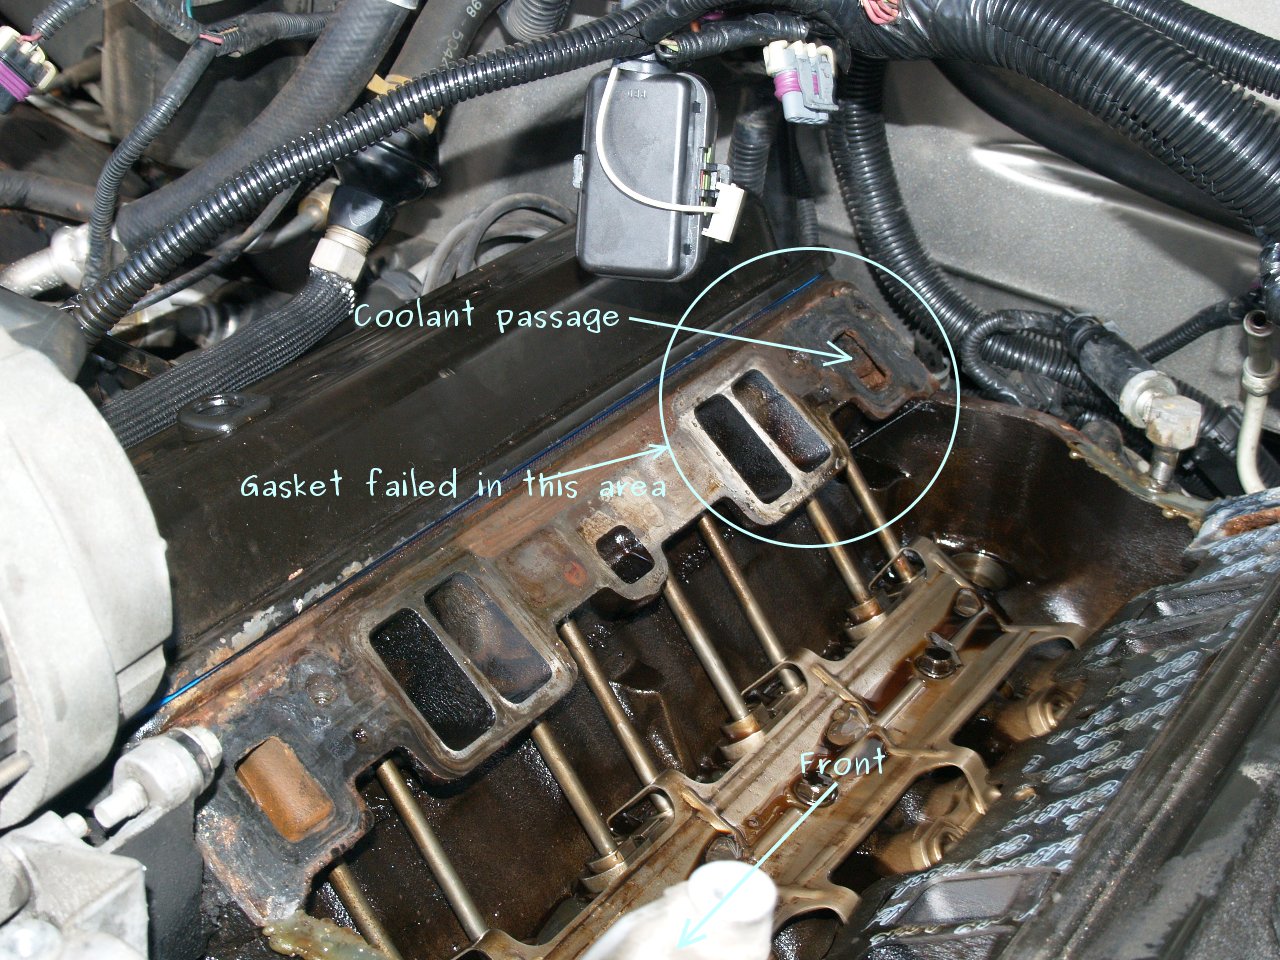 See P0185 in engine